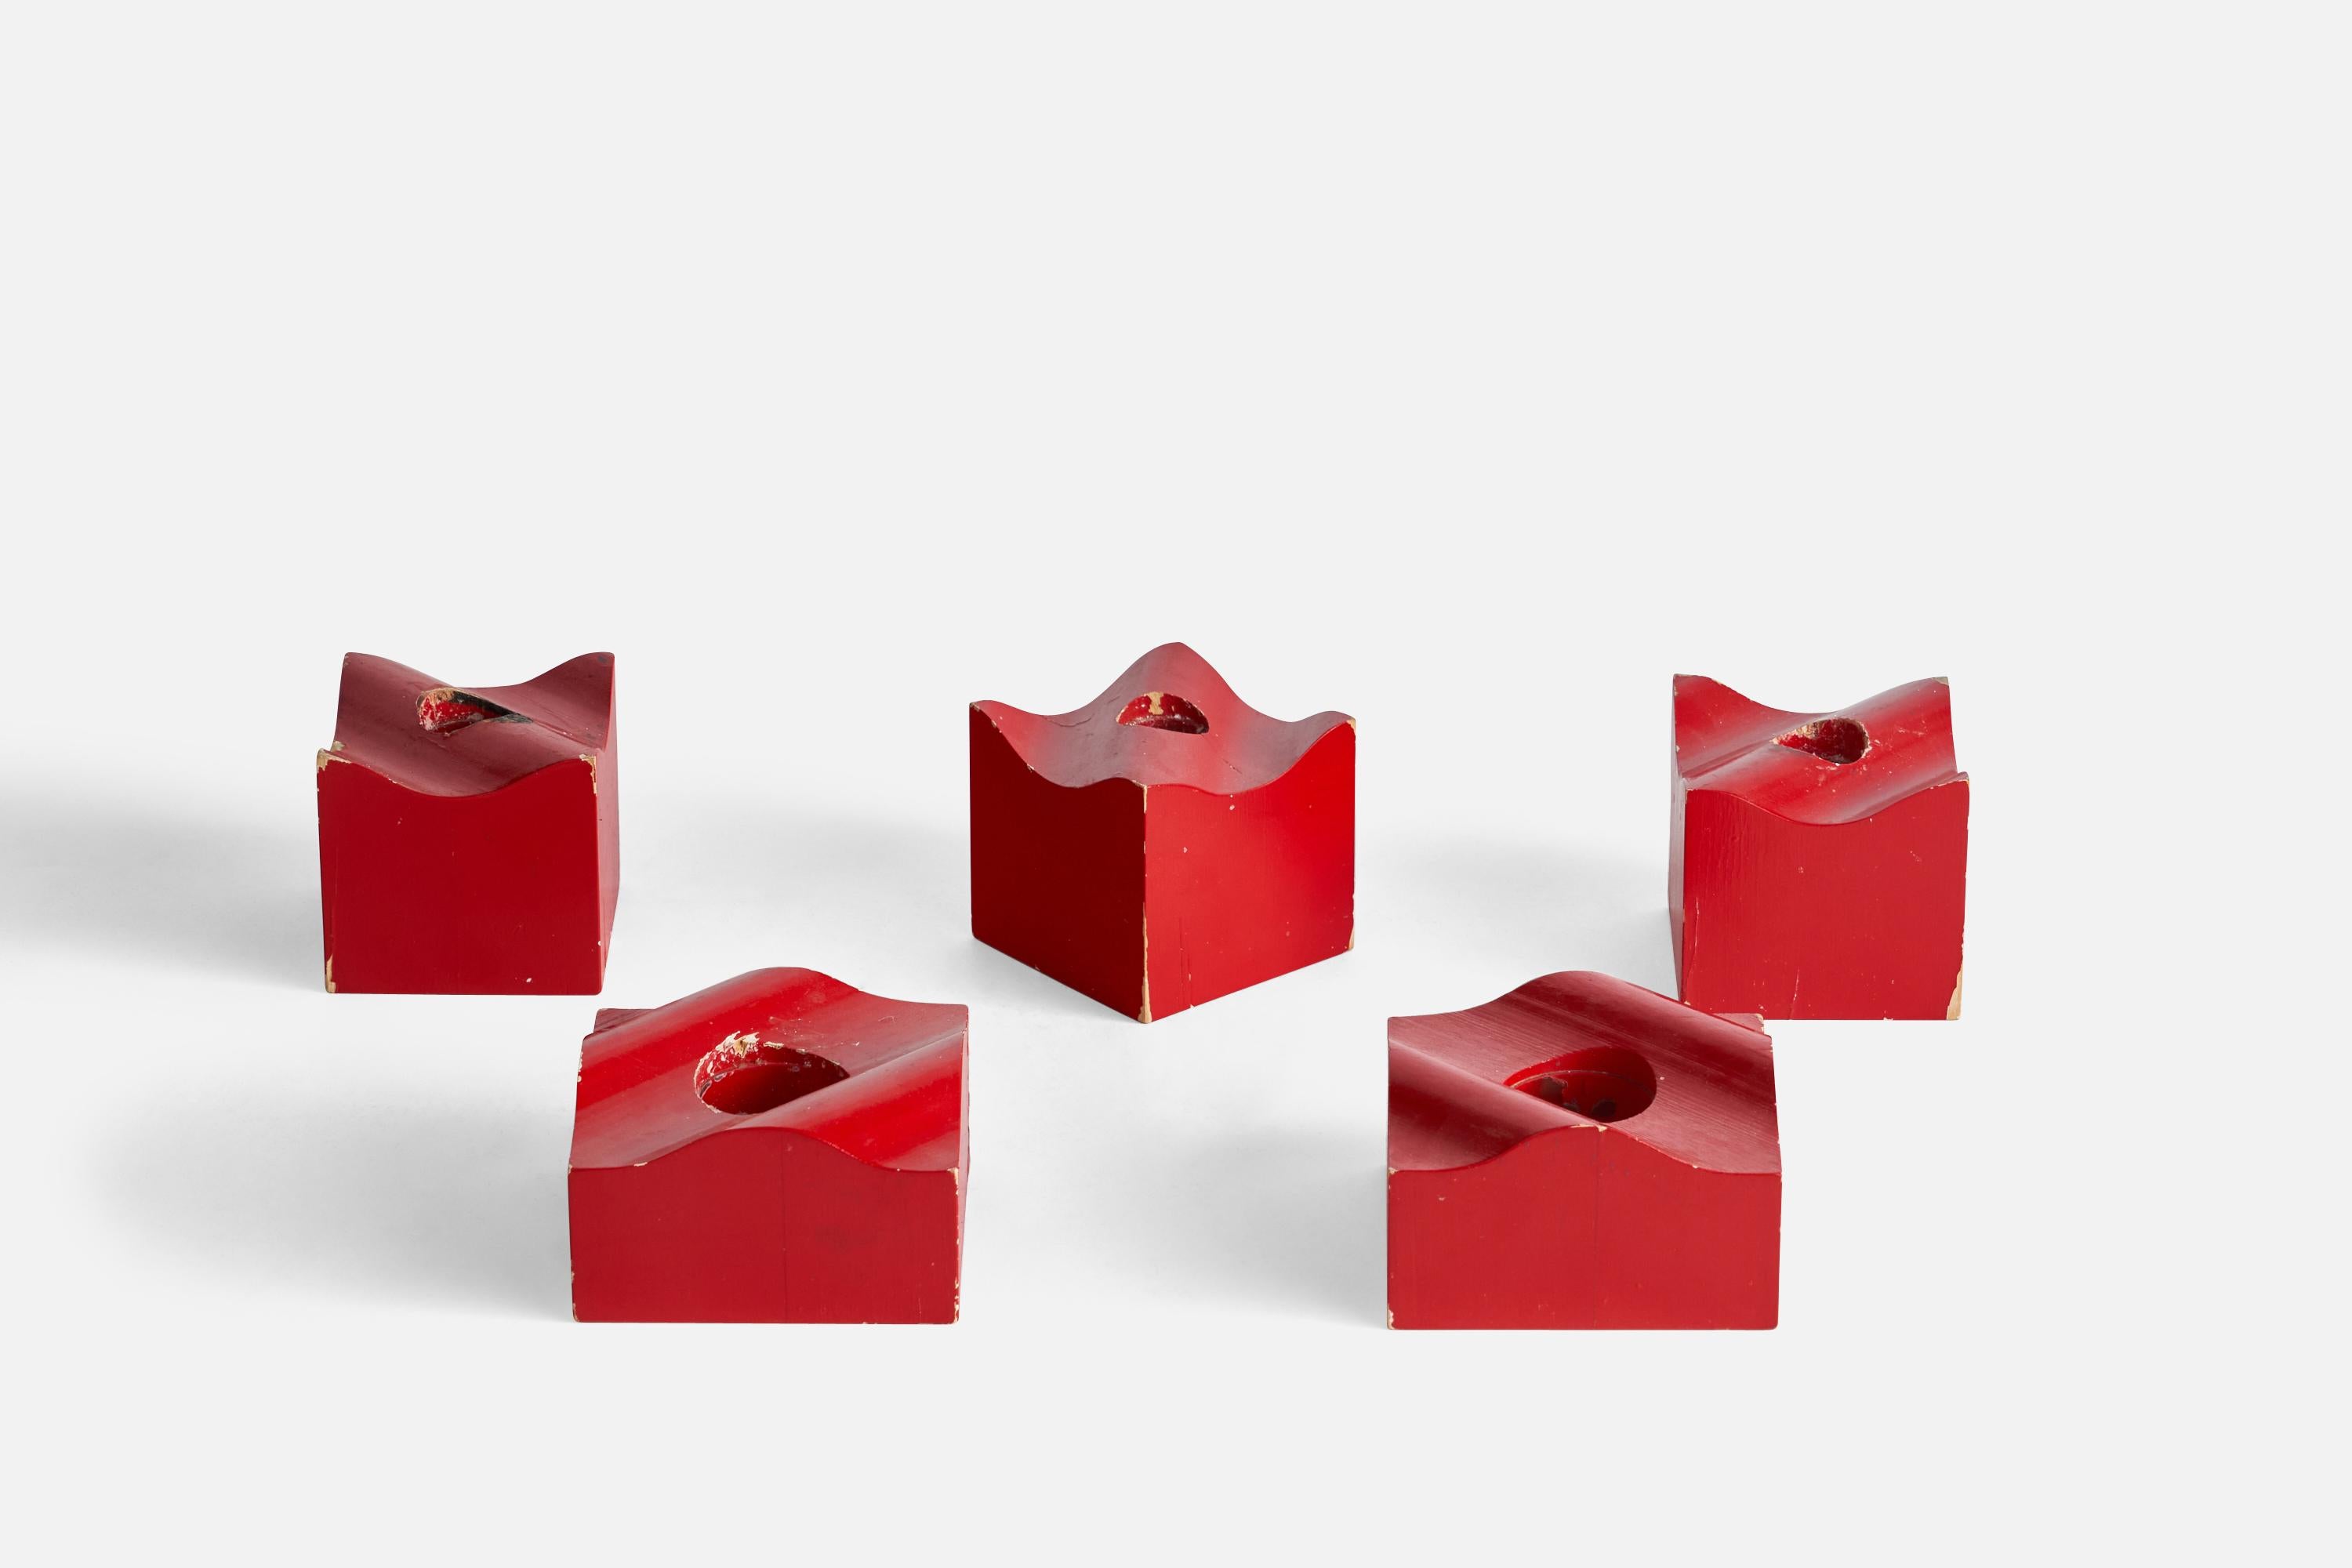 A set of five red-painted organic candlesticks designed by Bertil Valien and produced by Boda Trä, Sweden, c. 1960s.

Holds 1.4” diameter candles
smaller candle holders hold 0.7” diameter candles
With losses to red paint.